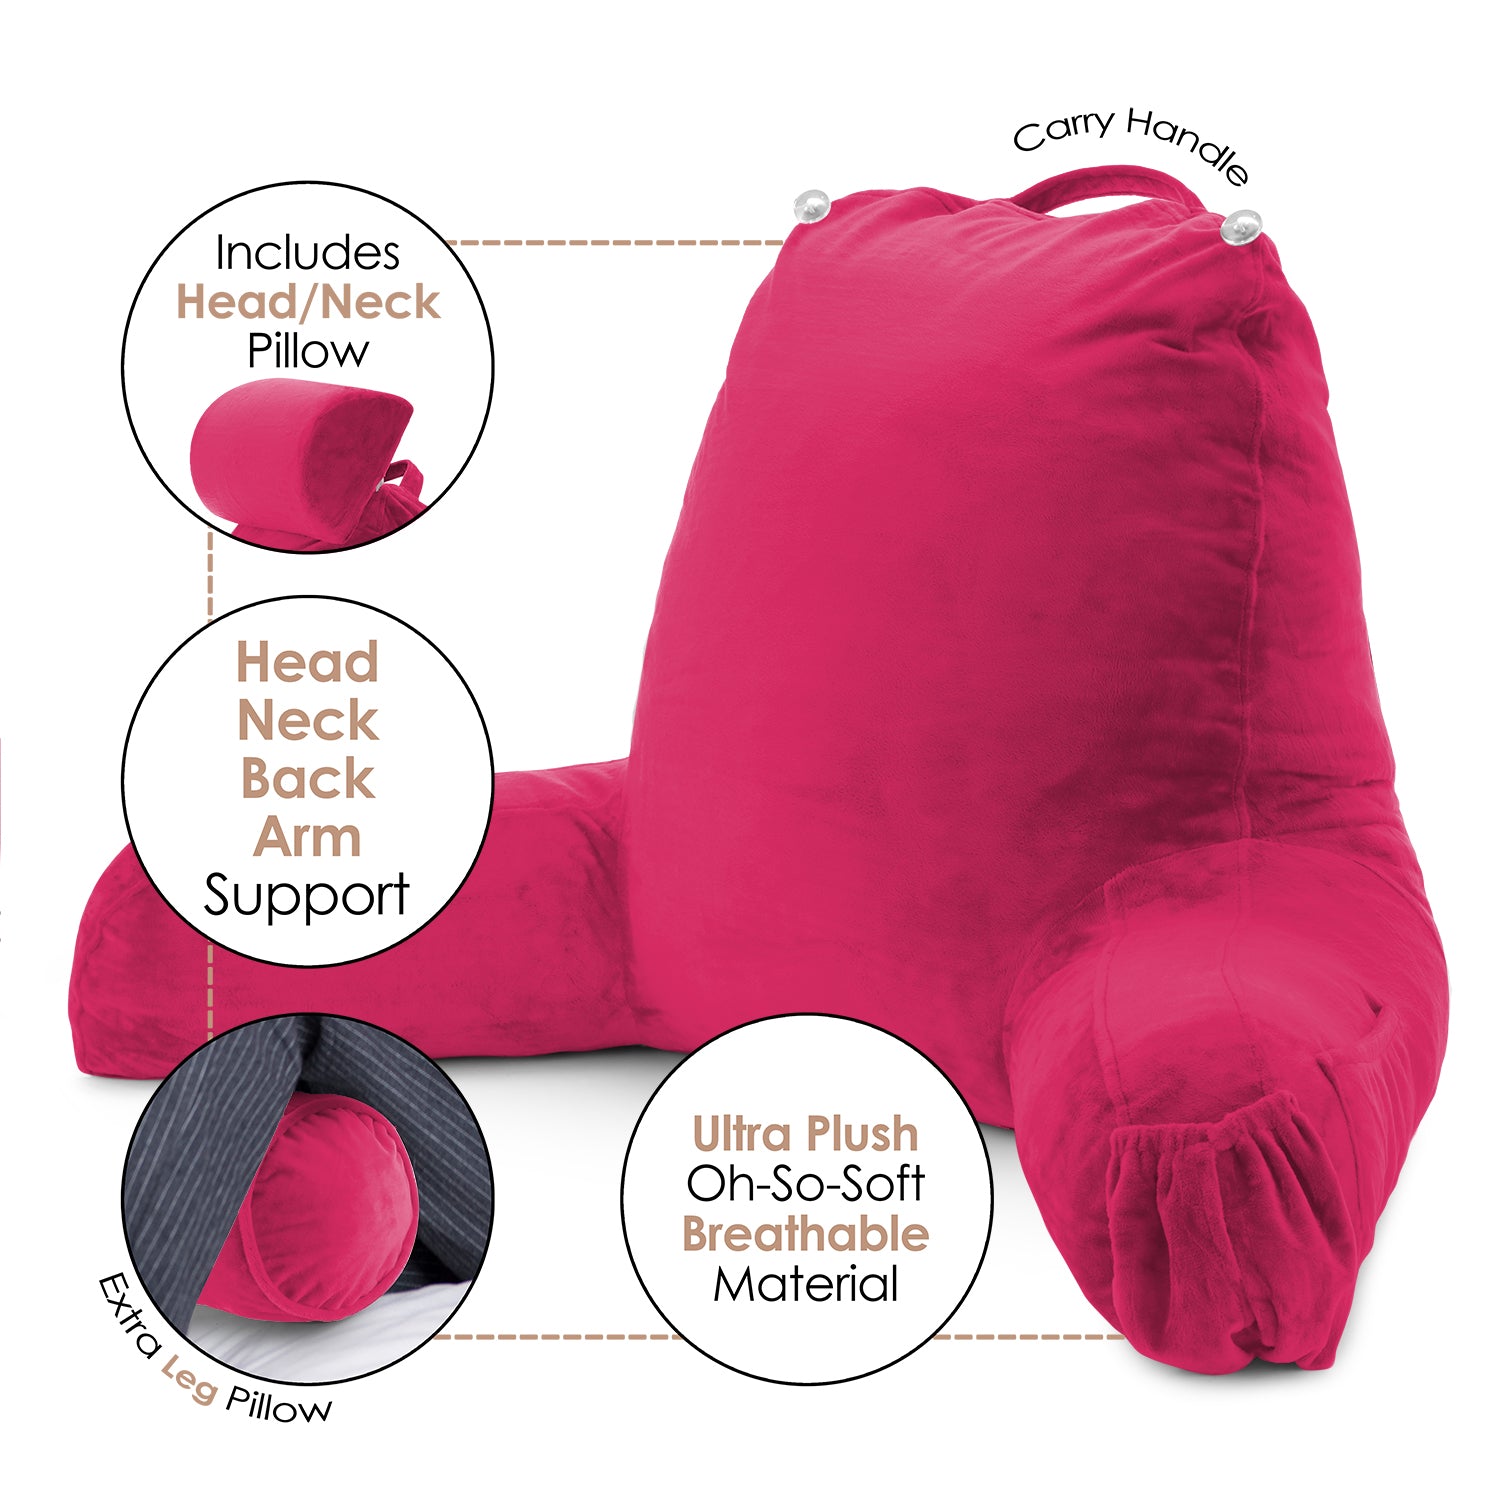 Nestl Reading Pillow, Extra Large Bed Rest Pillow with Arms – Premium Shredded Memory Foam TV Pillow, Detachable Neck Roll & Lumbar Support Pillow - Hot Pink